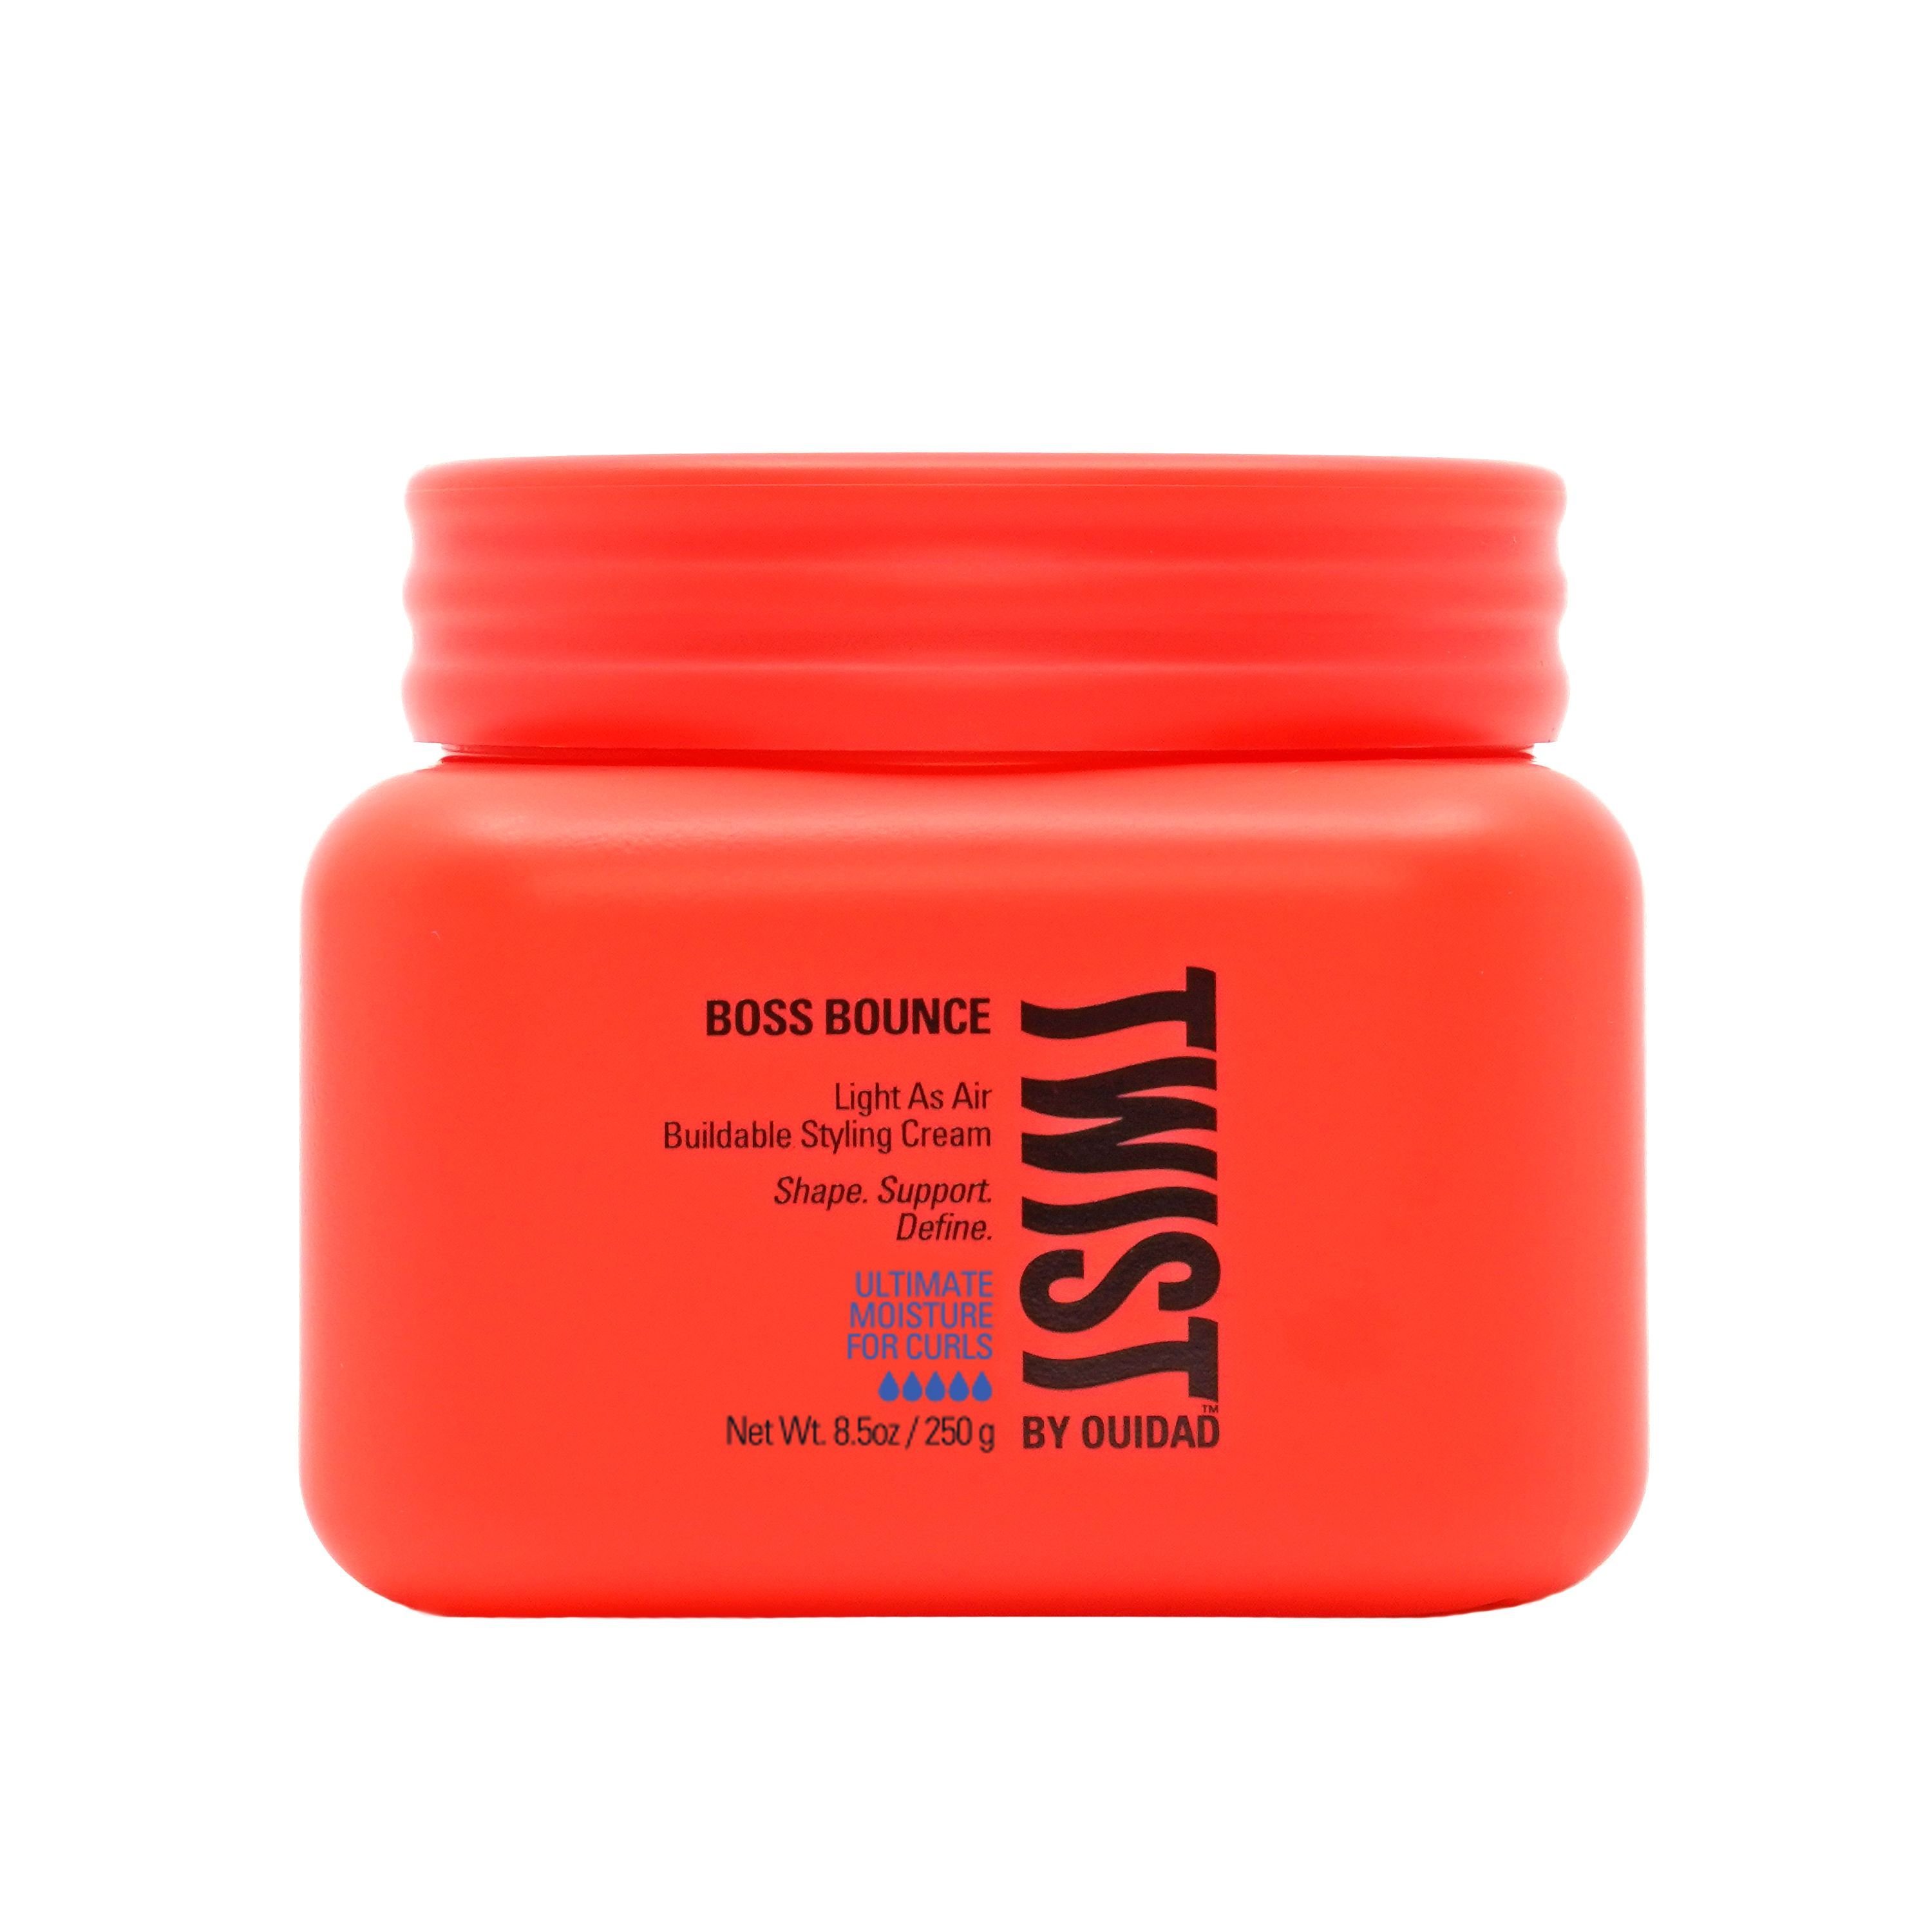 Boss Bounce Light As Air Buildable Styling Cream